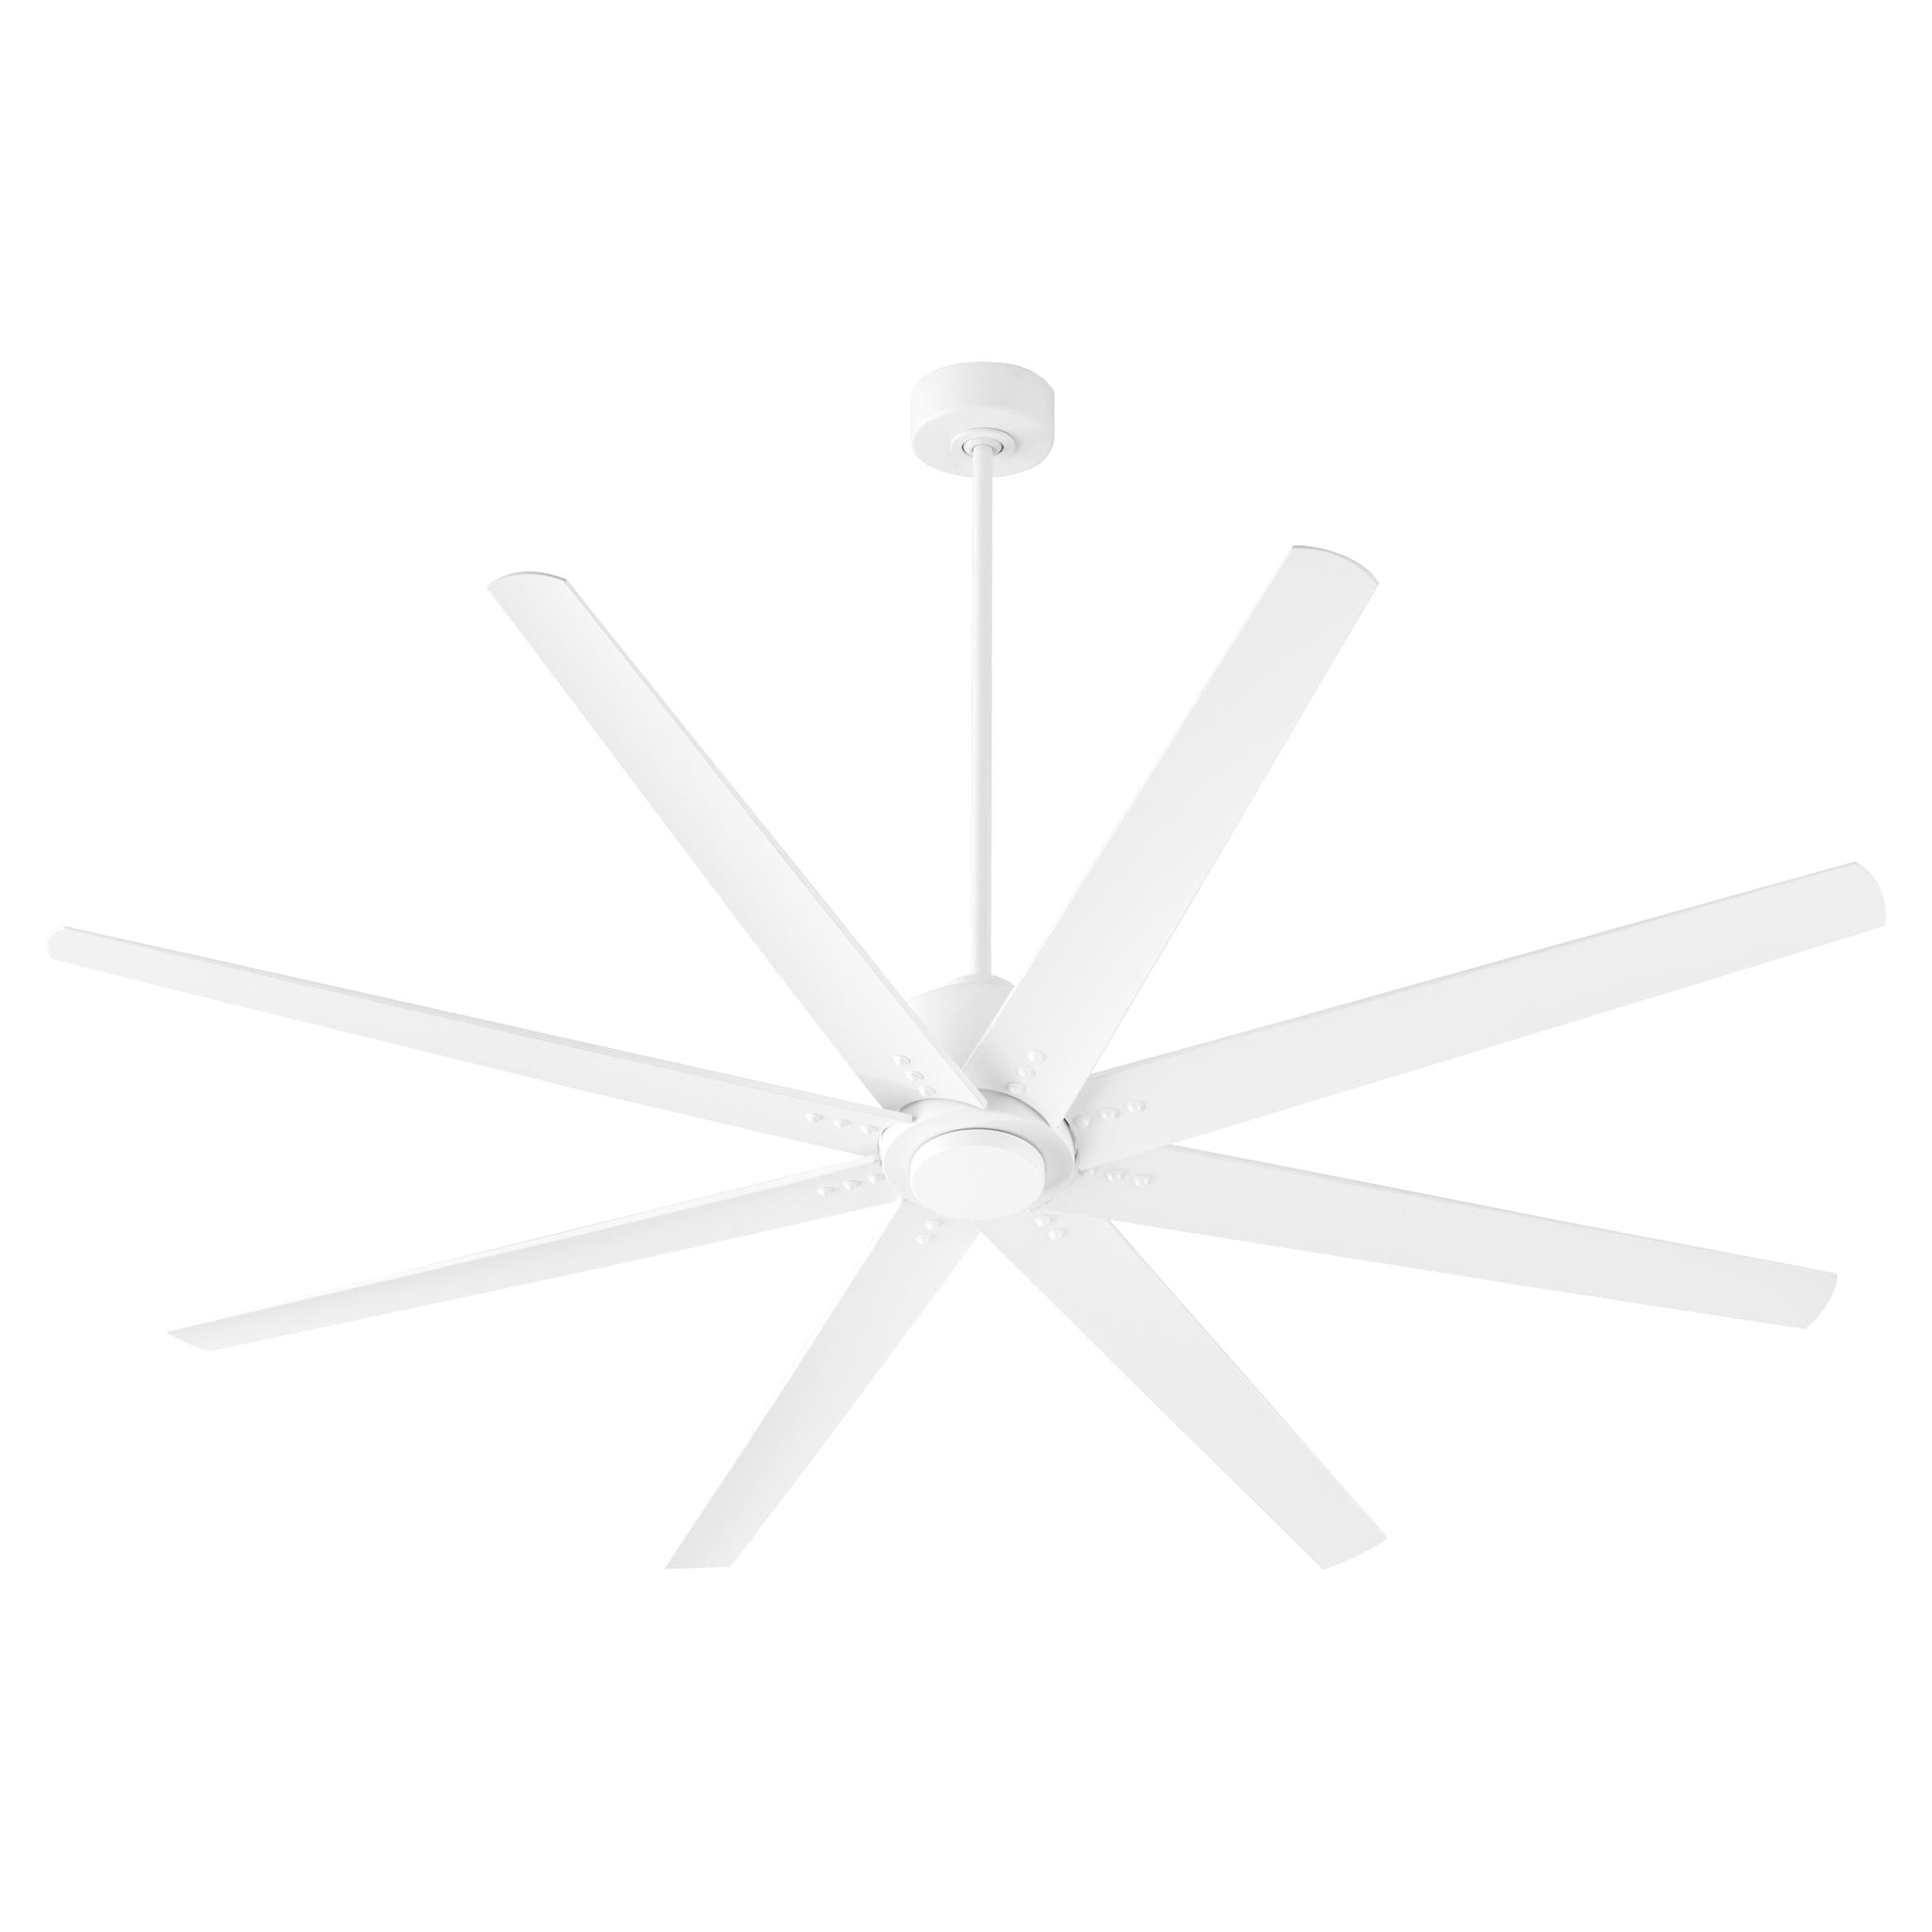 Oxygen FLEET Ceiling Fan 72 Inch Eight Blade Fan - 6 Speed Reversible with Remote and Optional LED Light Kit, Damp Rated